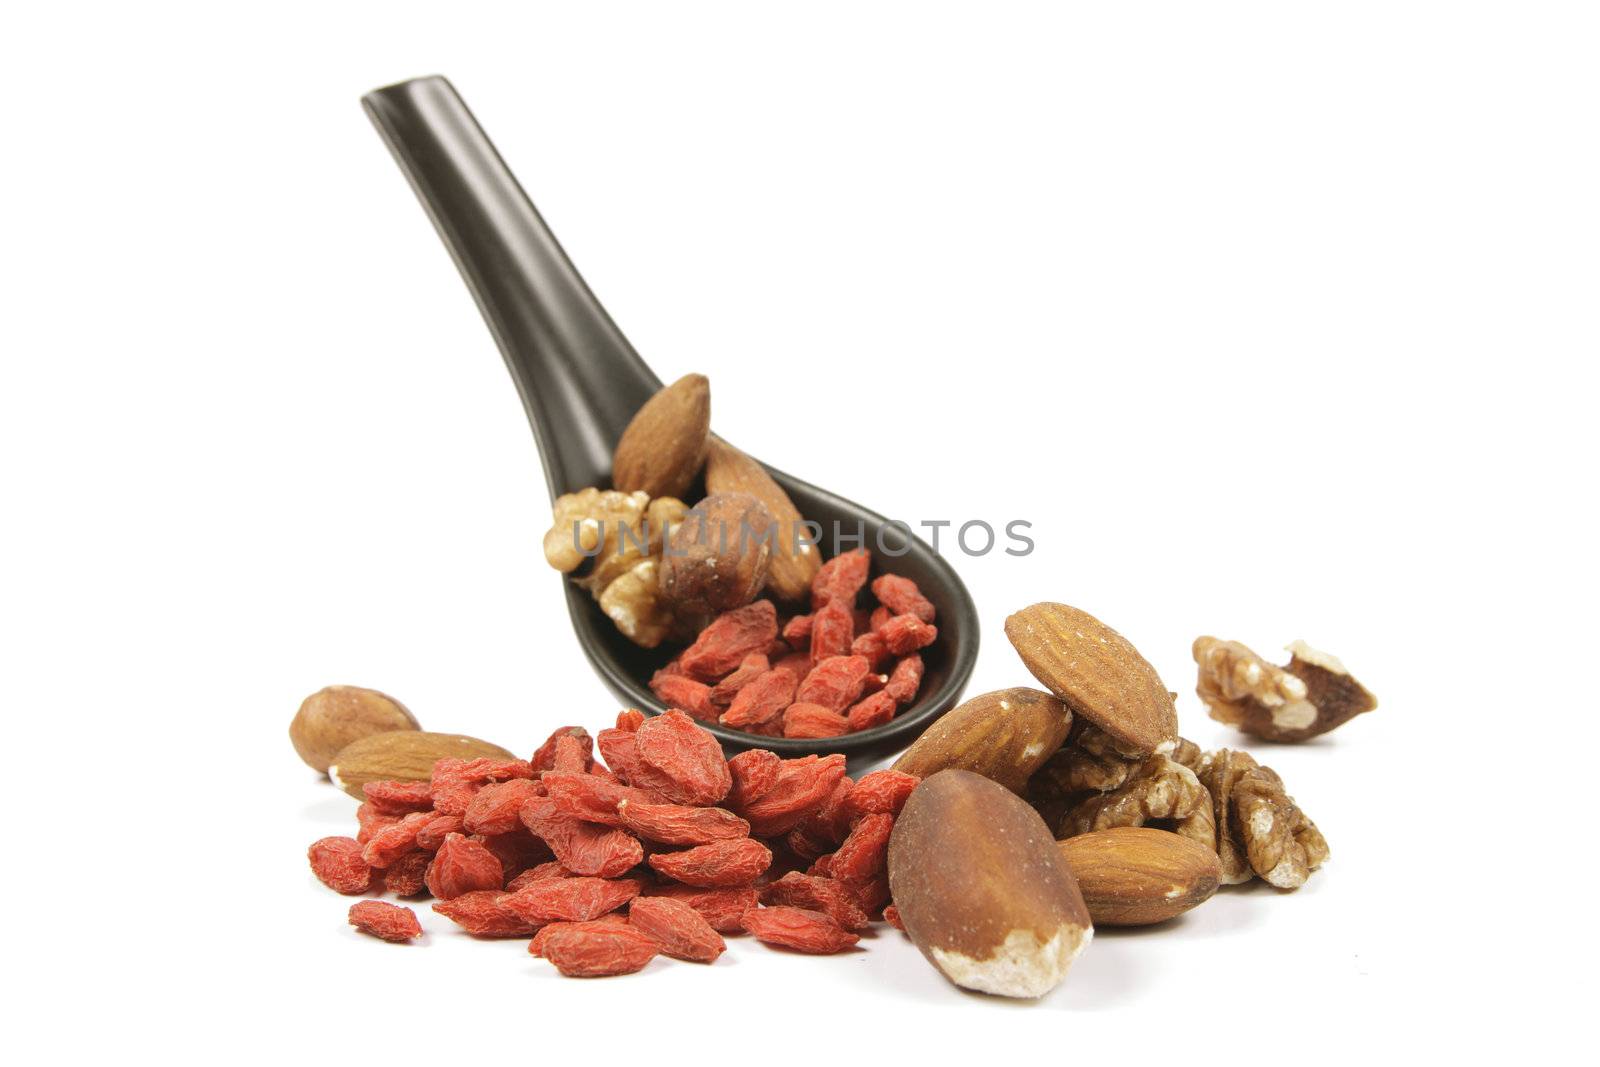 Goji Berries and Nuts on a Spoon by KeithWilson